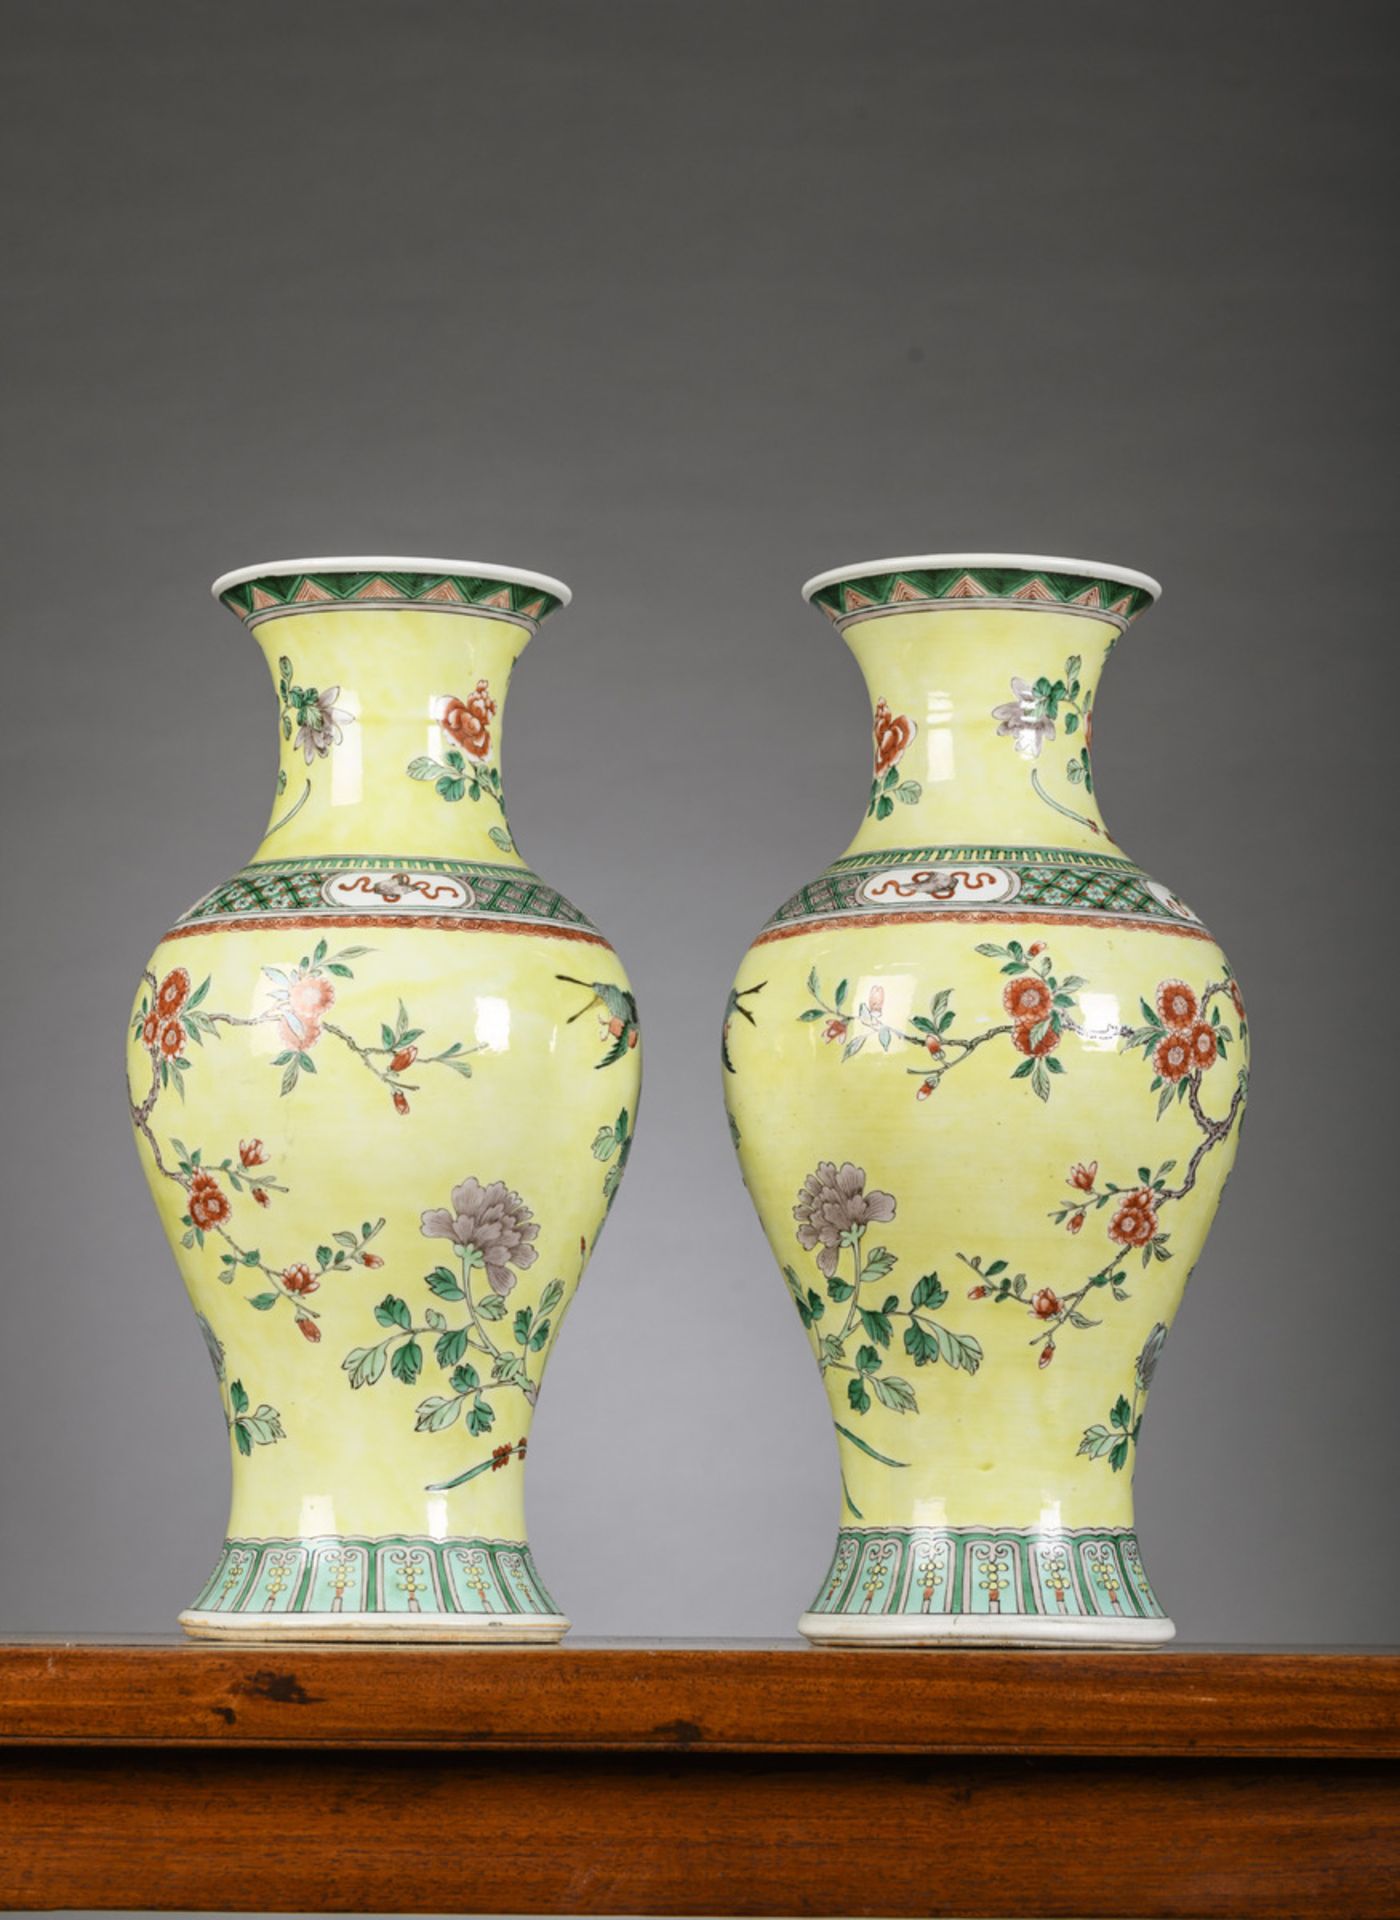 A pair of Chinese famille verte porcelain vases with yellow ground, 19th century (44.5cm) - Image 2 of 5